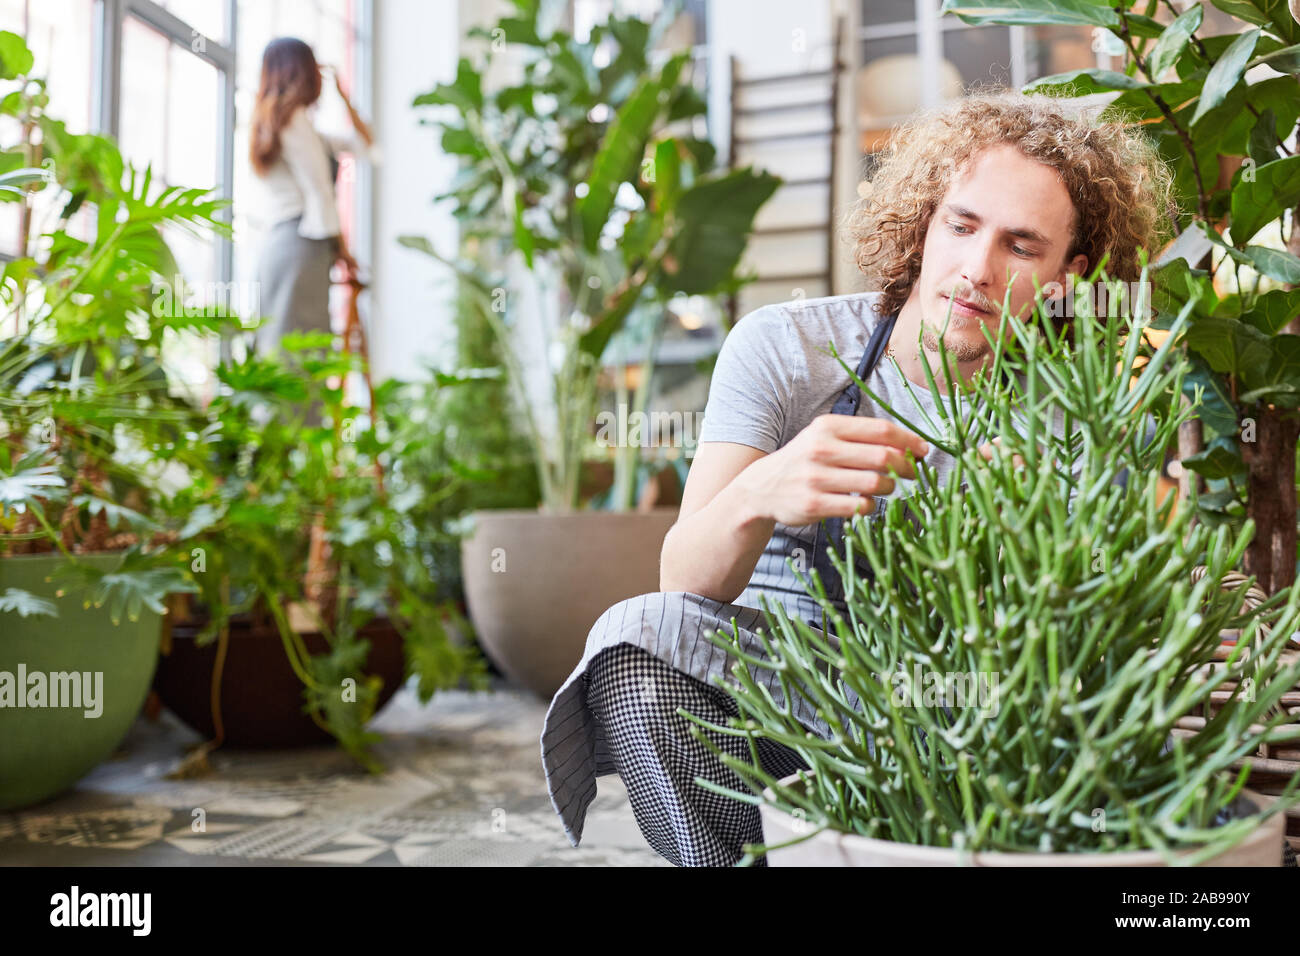 Young florist or gardener trainee taking care of a green plant Stock Photo